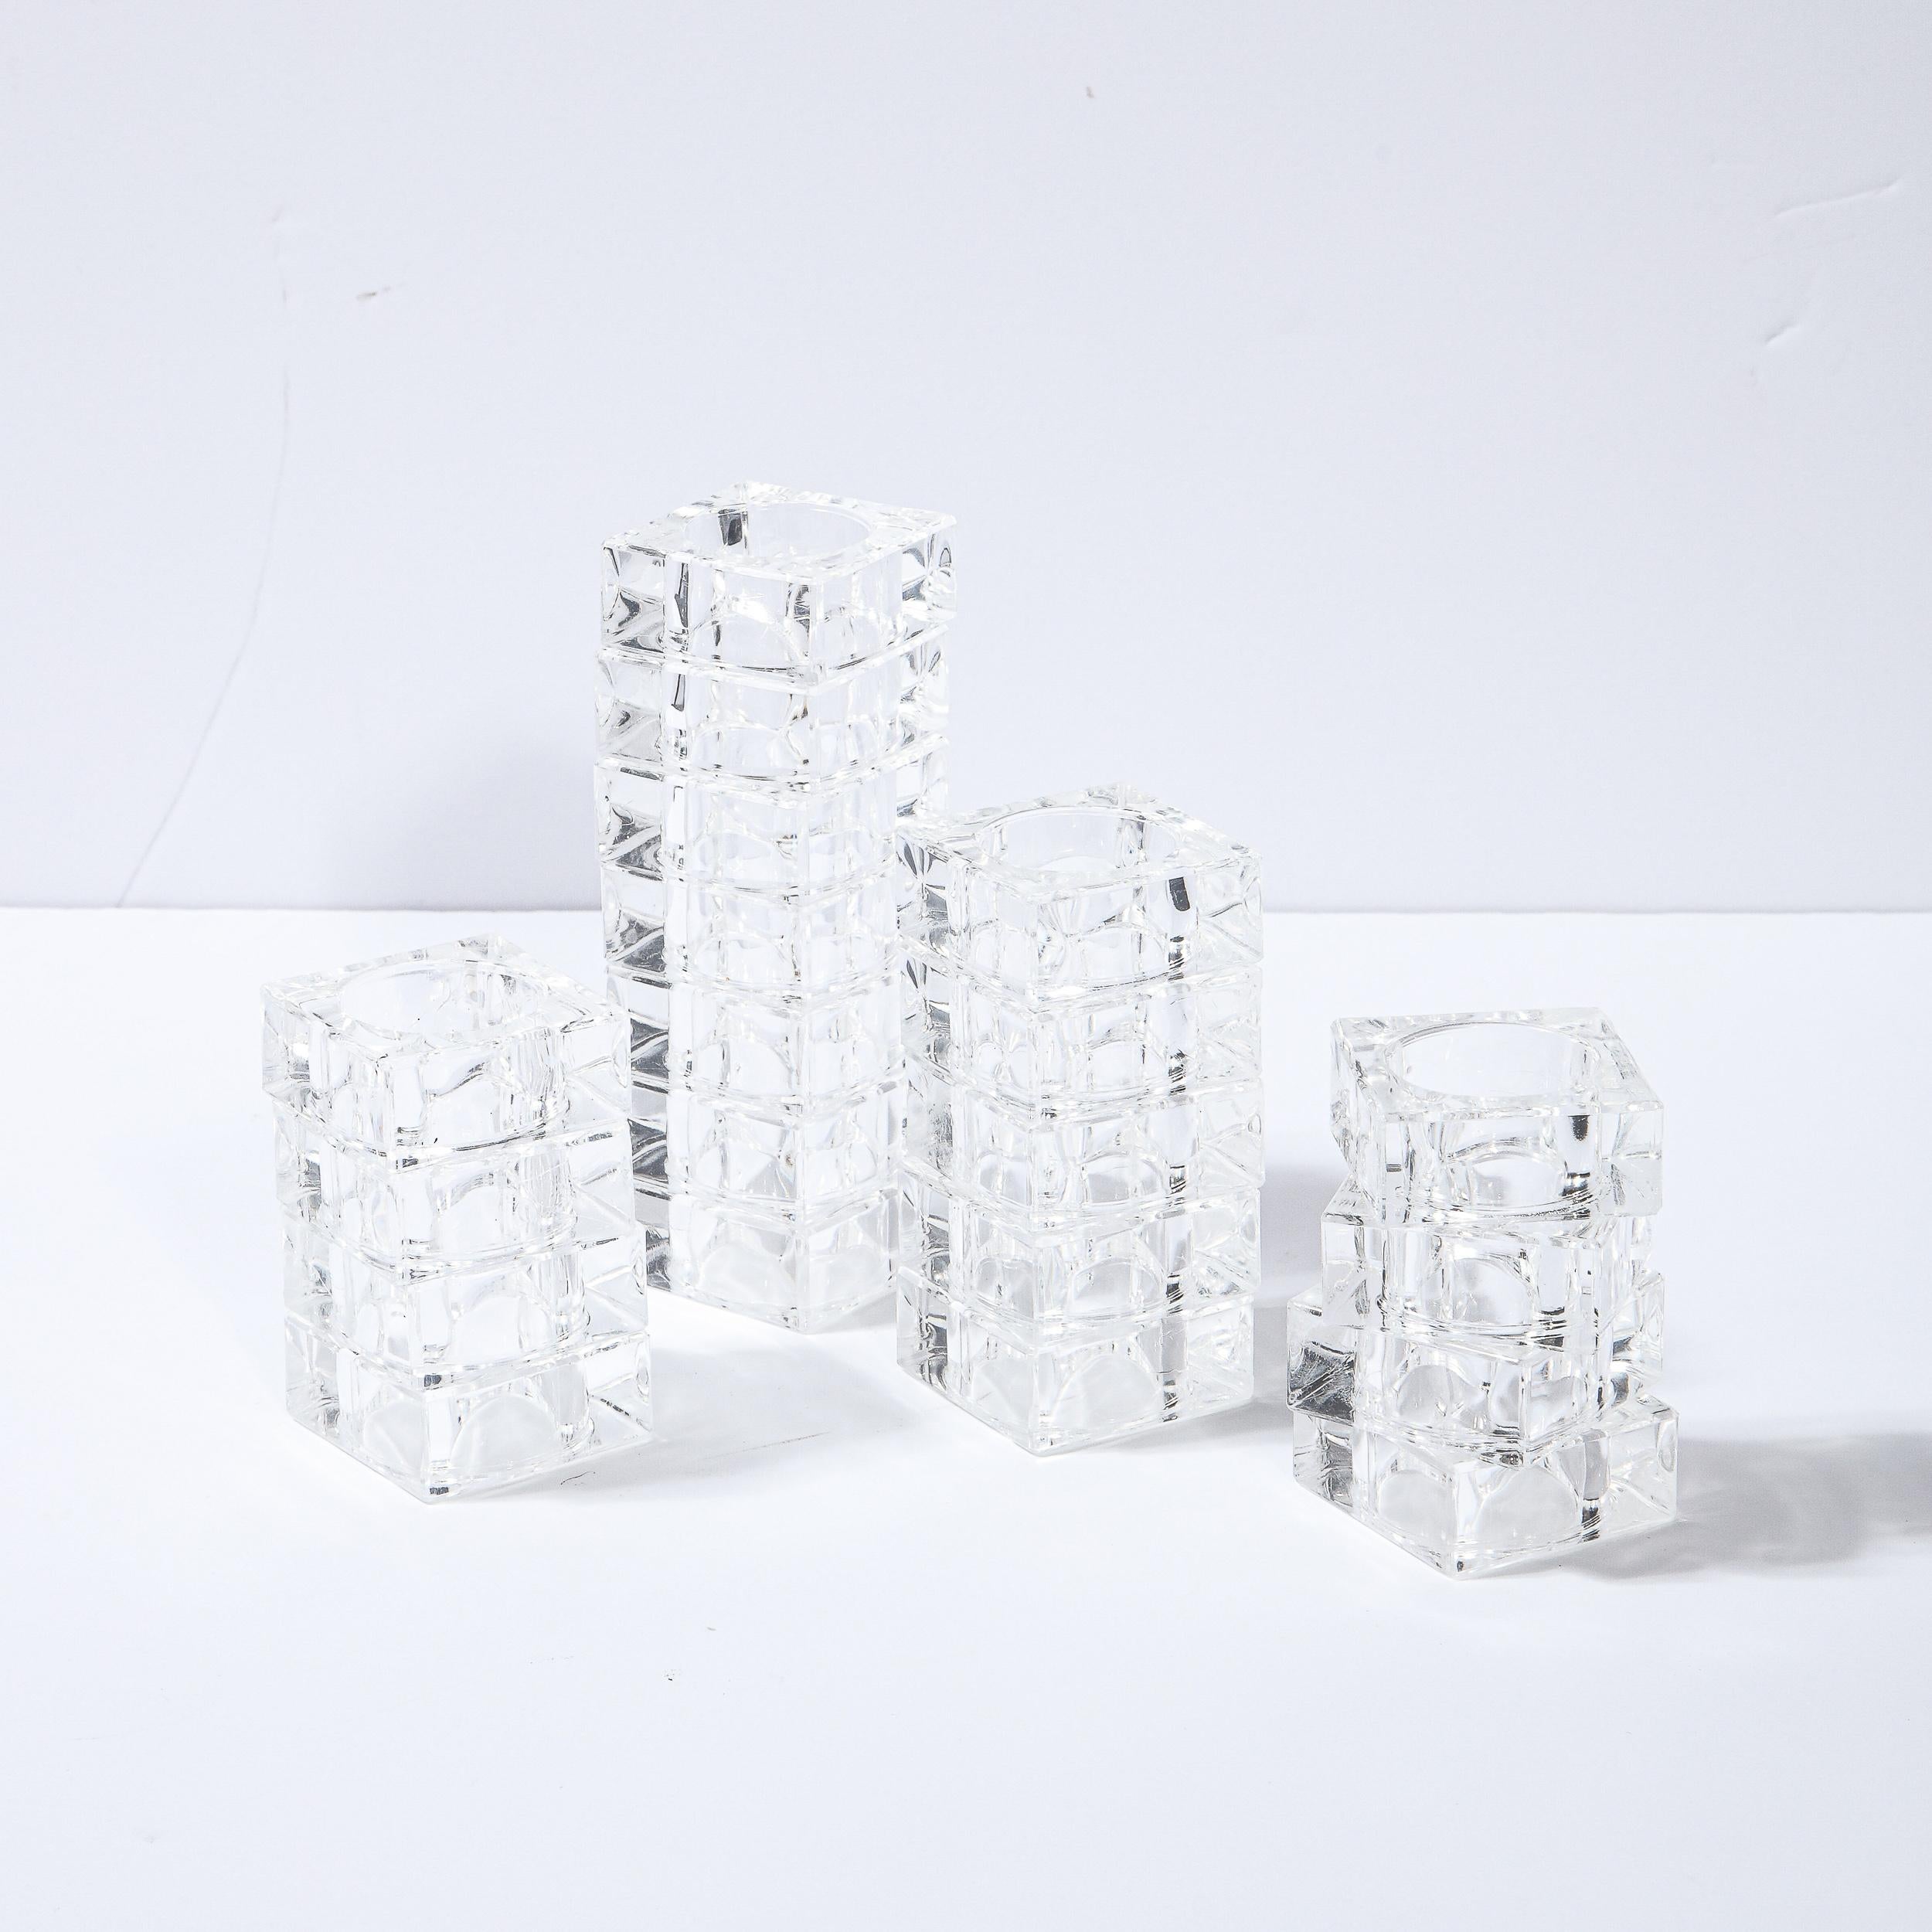 This stunning set of 18 Mid-Century Modern napkin holders were realized in the United States circa 1970. They feature square bodies in translucent lucite with circular cut outs in the center of each. With their clean modernist lines and